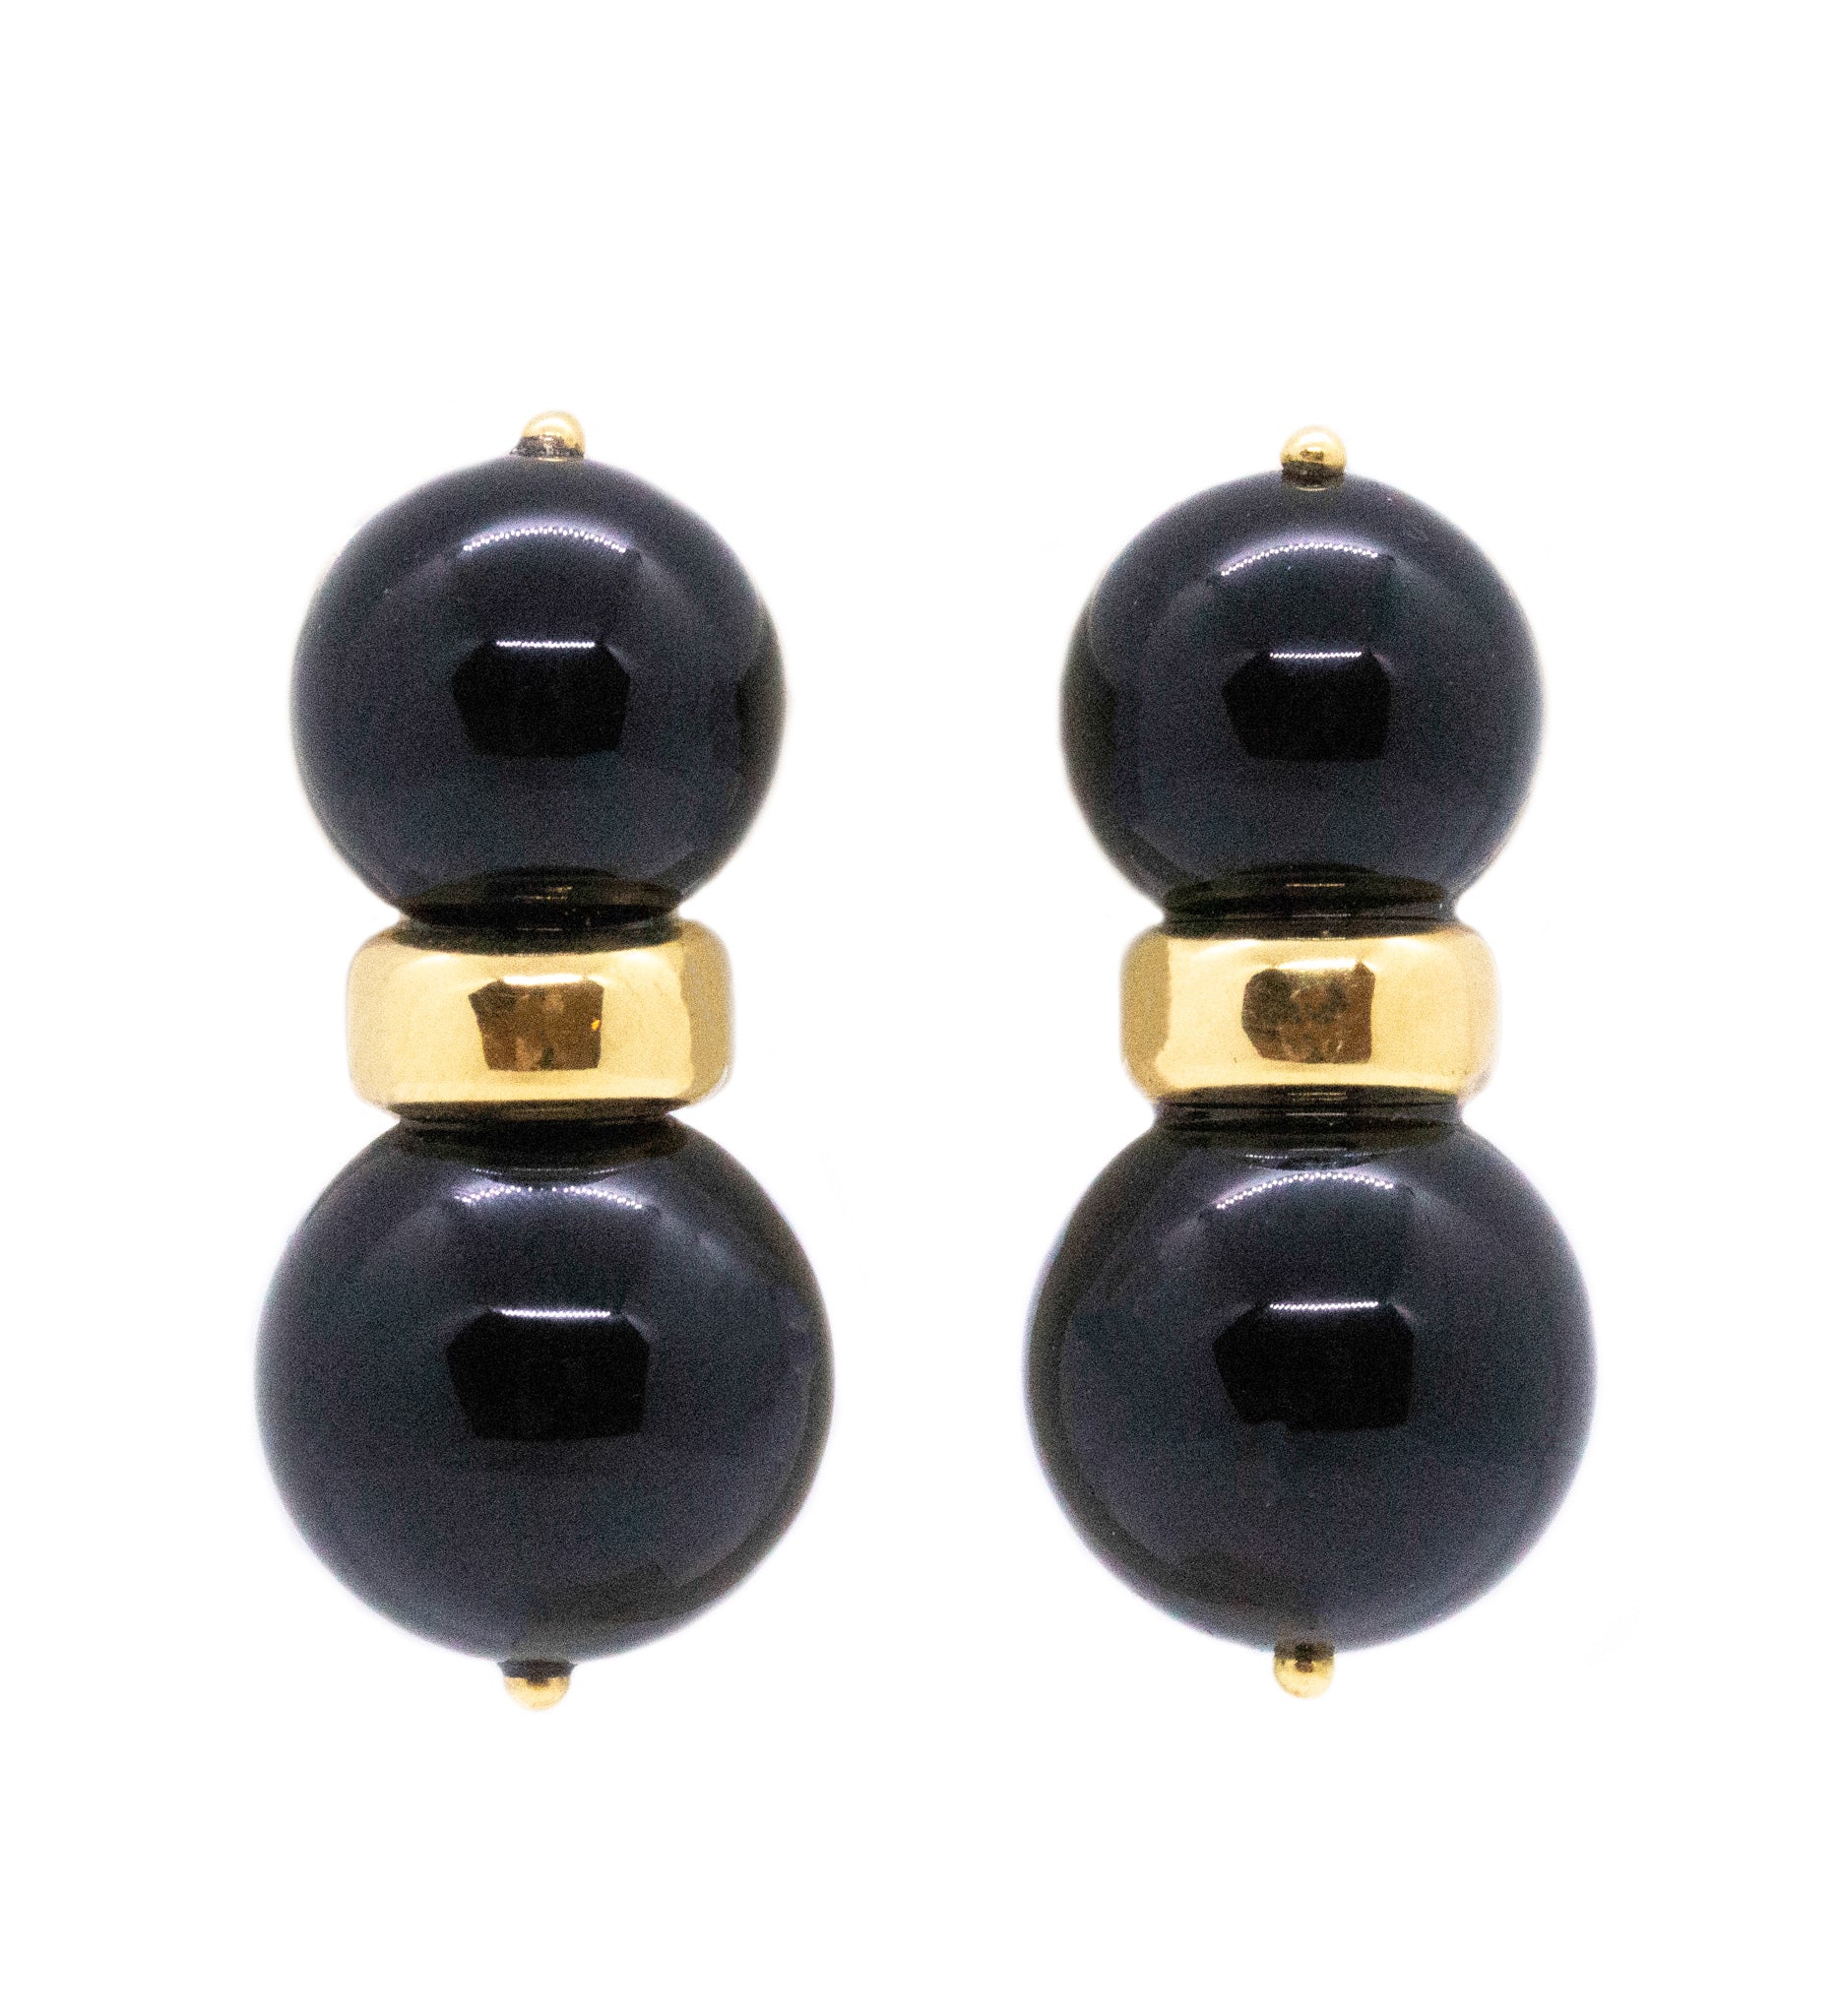 ANDREW CLUNN 18 KT GOLD EARRINGS WITH BLACK ONYX